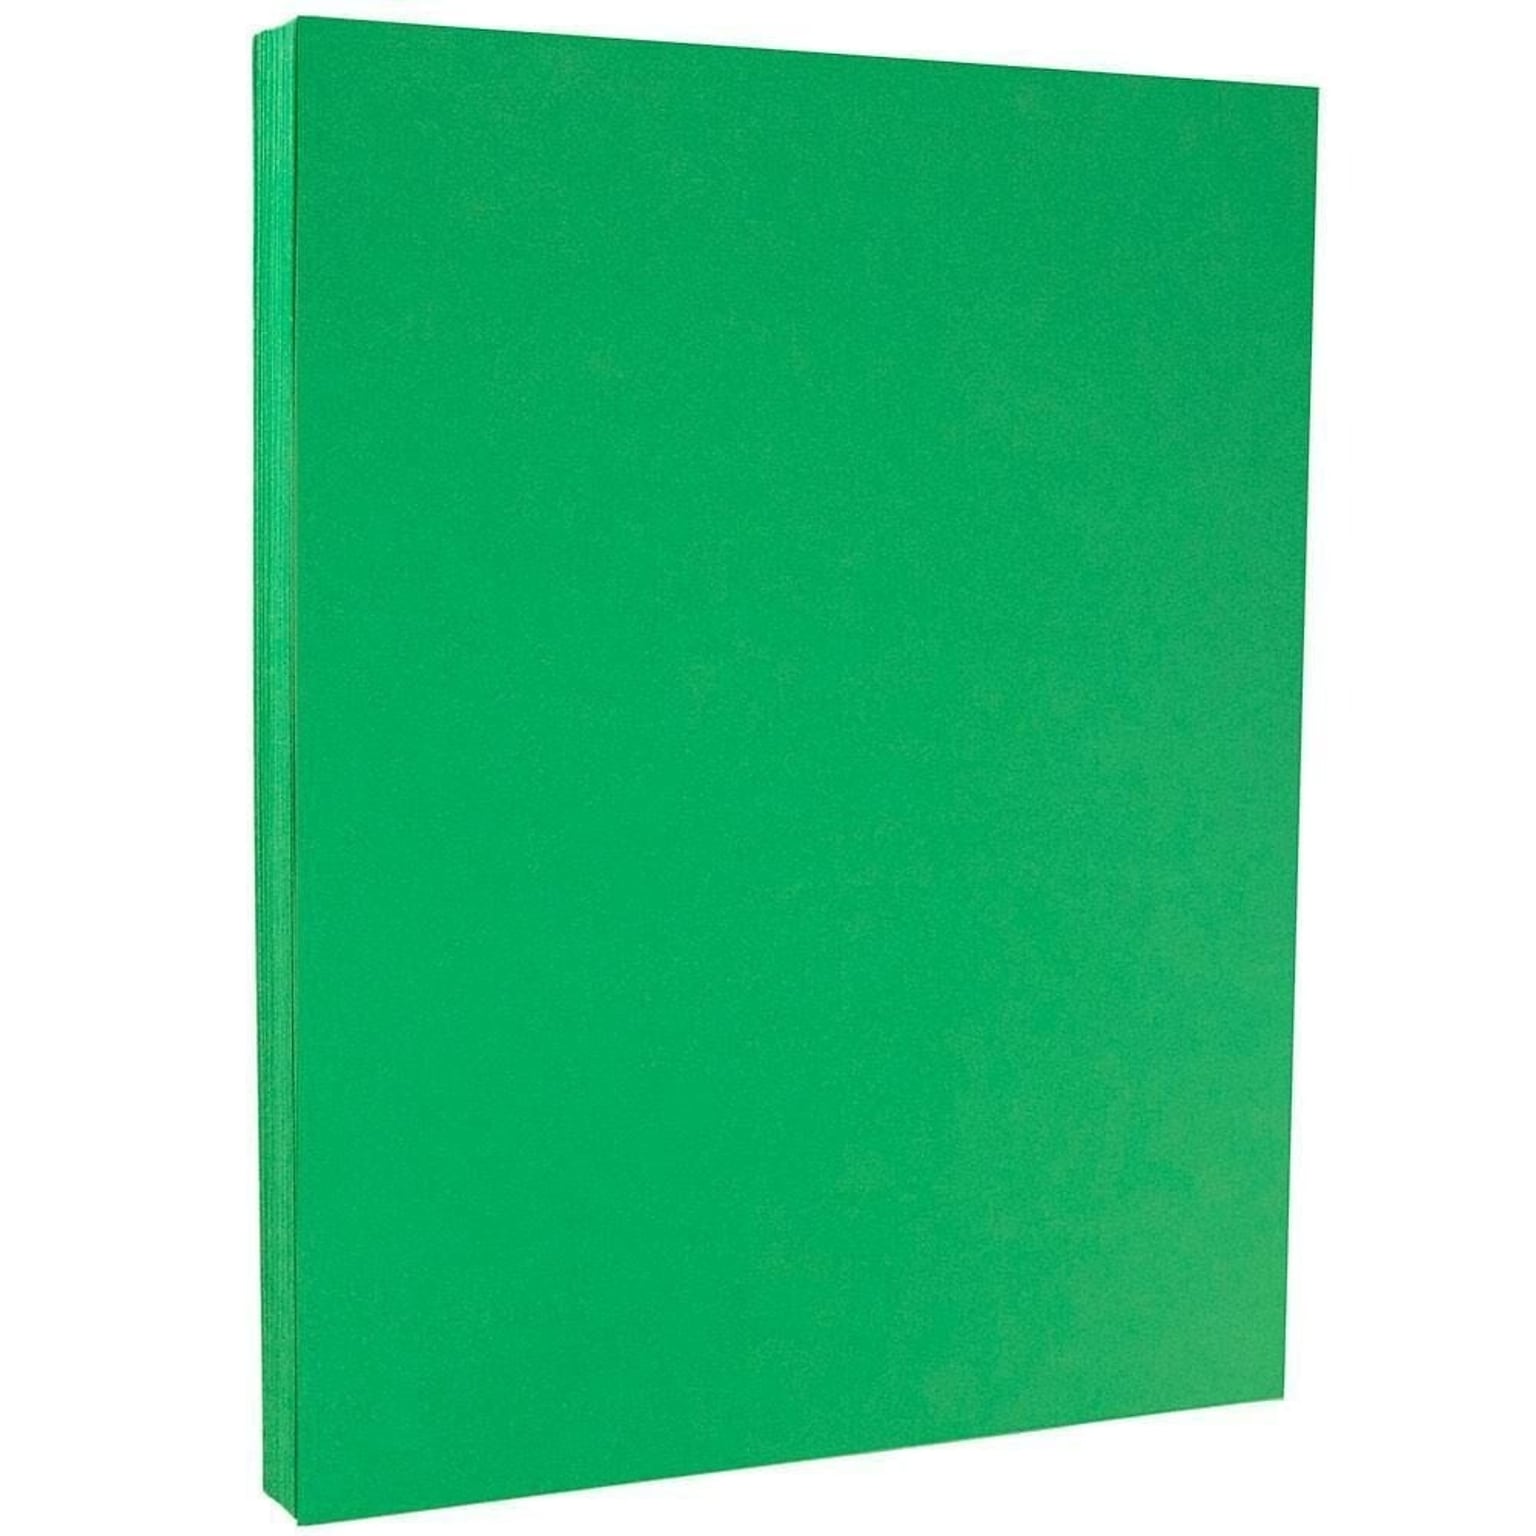 JAM PAPER 8.5 x 11 Colored Cardstock, 65lb, Green, 100 Sheets/Pack (104190G)